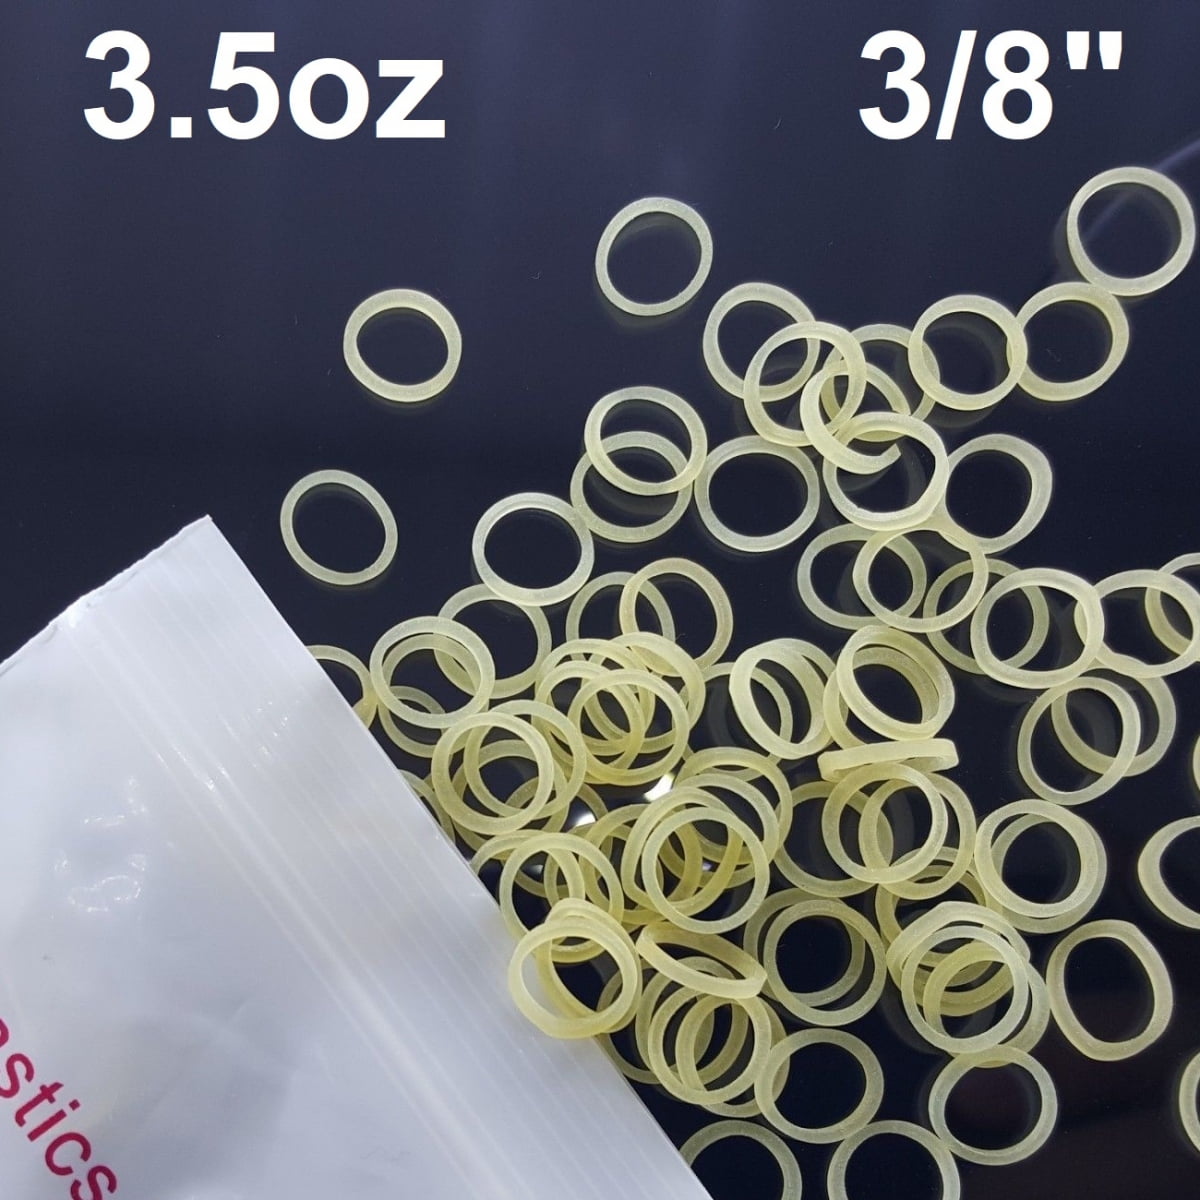 500 pack Orthodontic Elastics Rubber Bands 3/8 Great for Dog Grooming Top Knots and Dreadlocks by Cayenas Bows Braids 